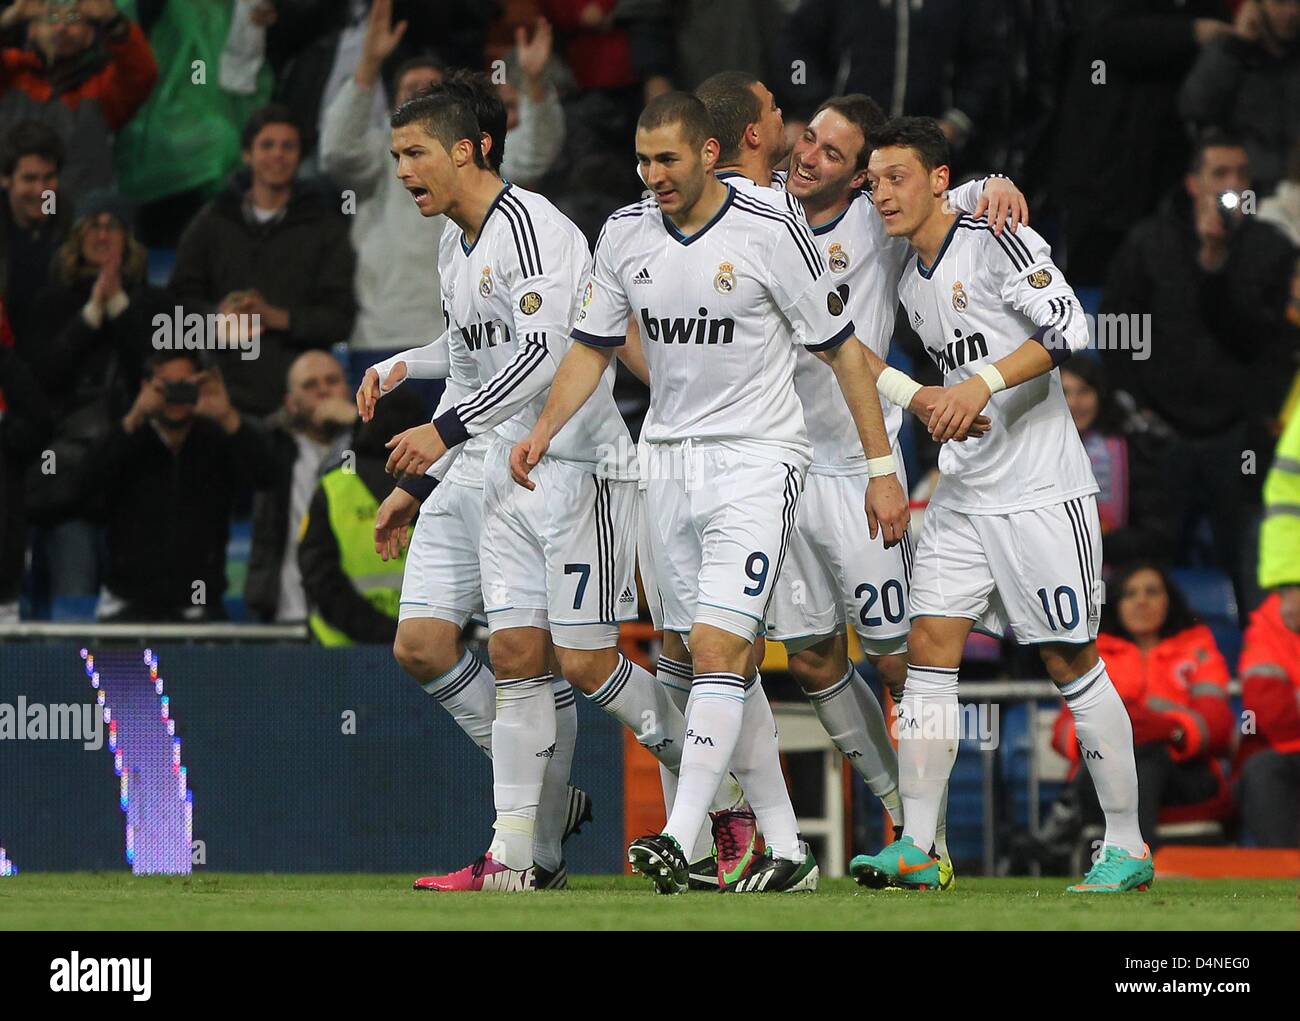 Real Madrid's Gonzalo Higuain (2nd R) celebrates his 4:2-goal with Mesut Özil (R), Pepe (3rd R), Karim Benzema (3rd L), Cristiano Ronaldo (2nd L) and Kaka (L) during during the Spanish Primera Division soccer match between Real Madrid and RCD Mallorca at Santiago Bernabeu stadium in Madrid, Spain, 16 March 2013. Madrid won 5:2. Photo: Fabian Stratenschulte/dpa/Alamy Live News Stock Photo